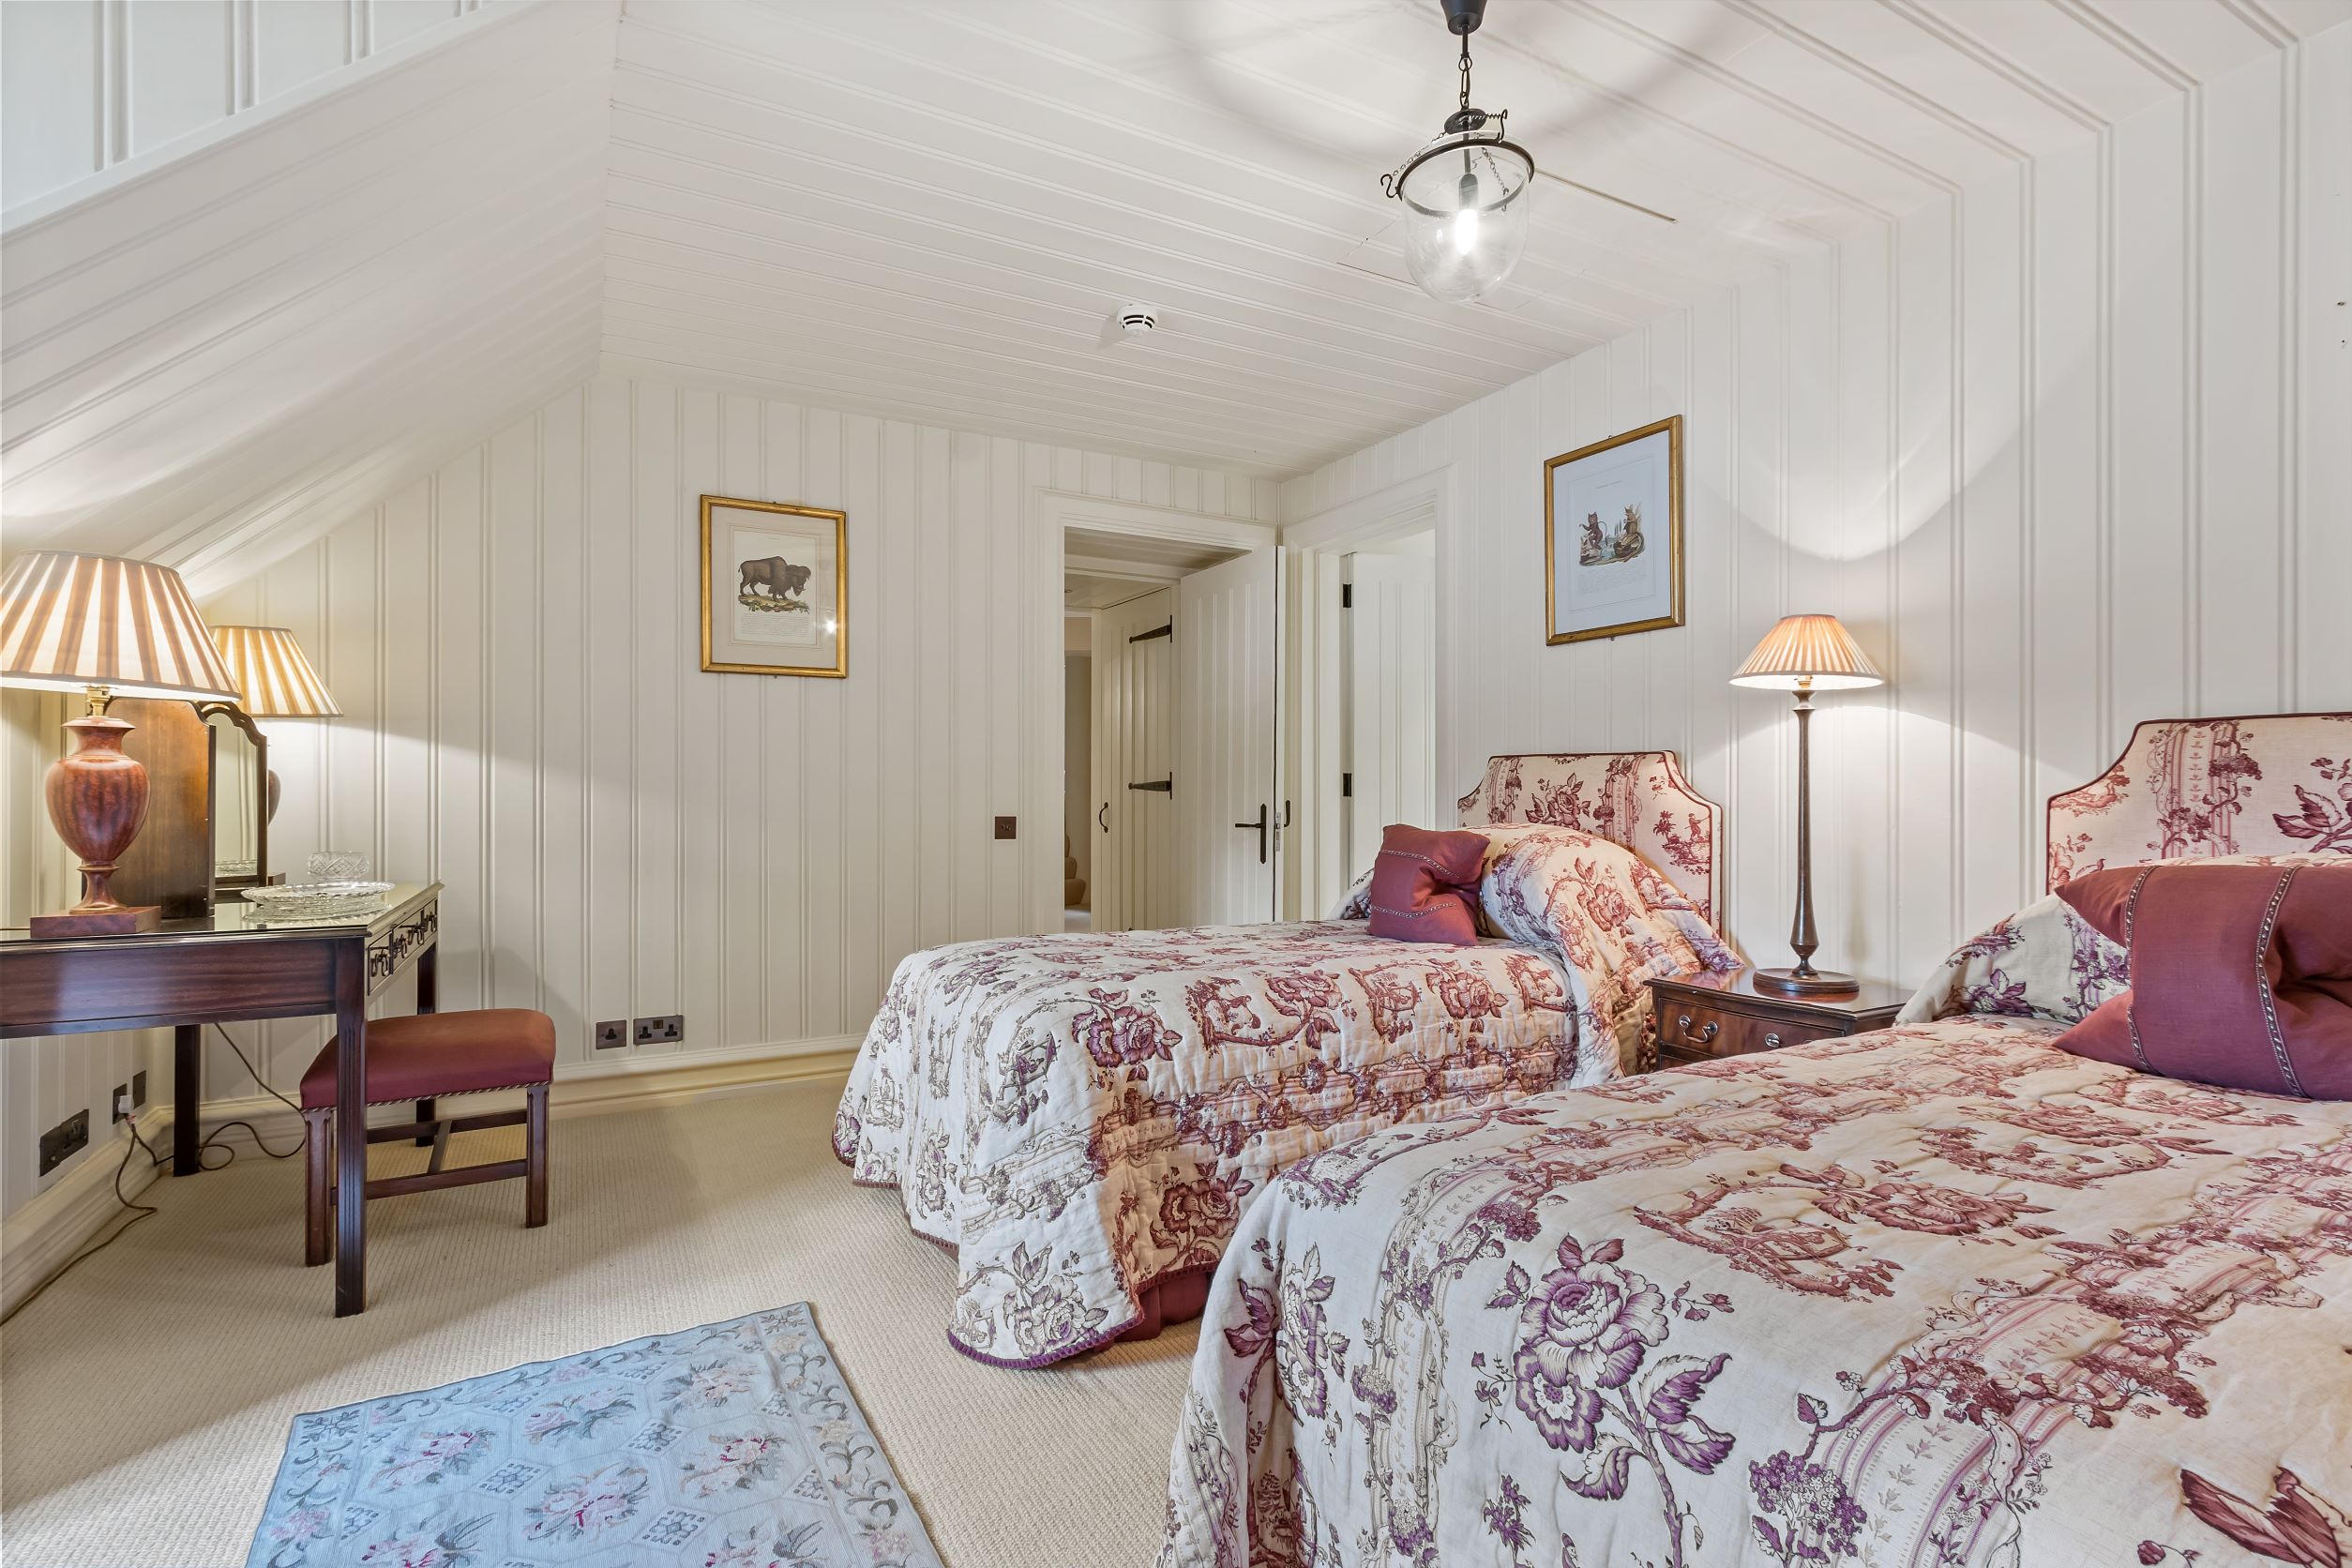 twin-bedroom-with-white-wood-clad-country-style-panelling